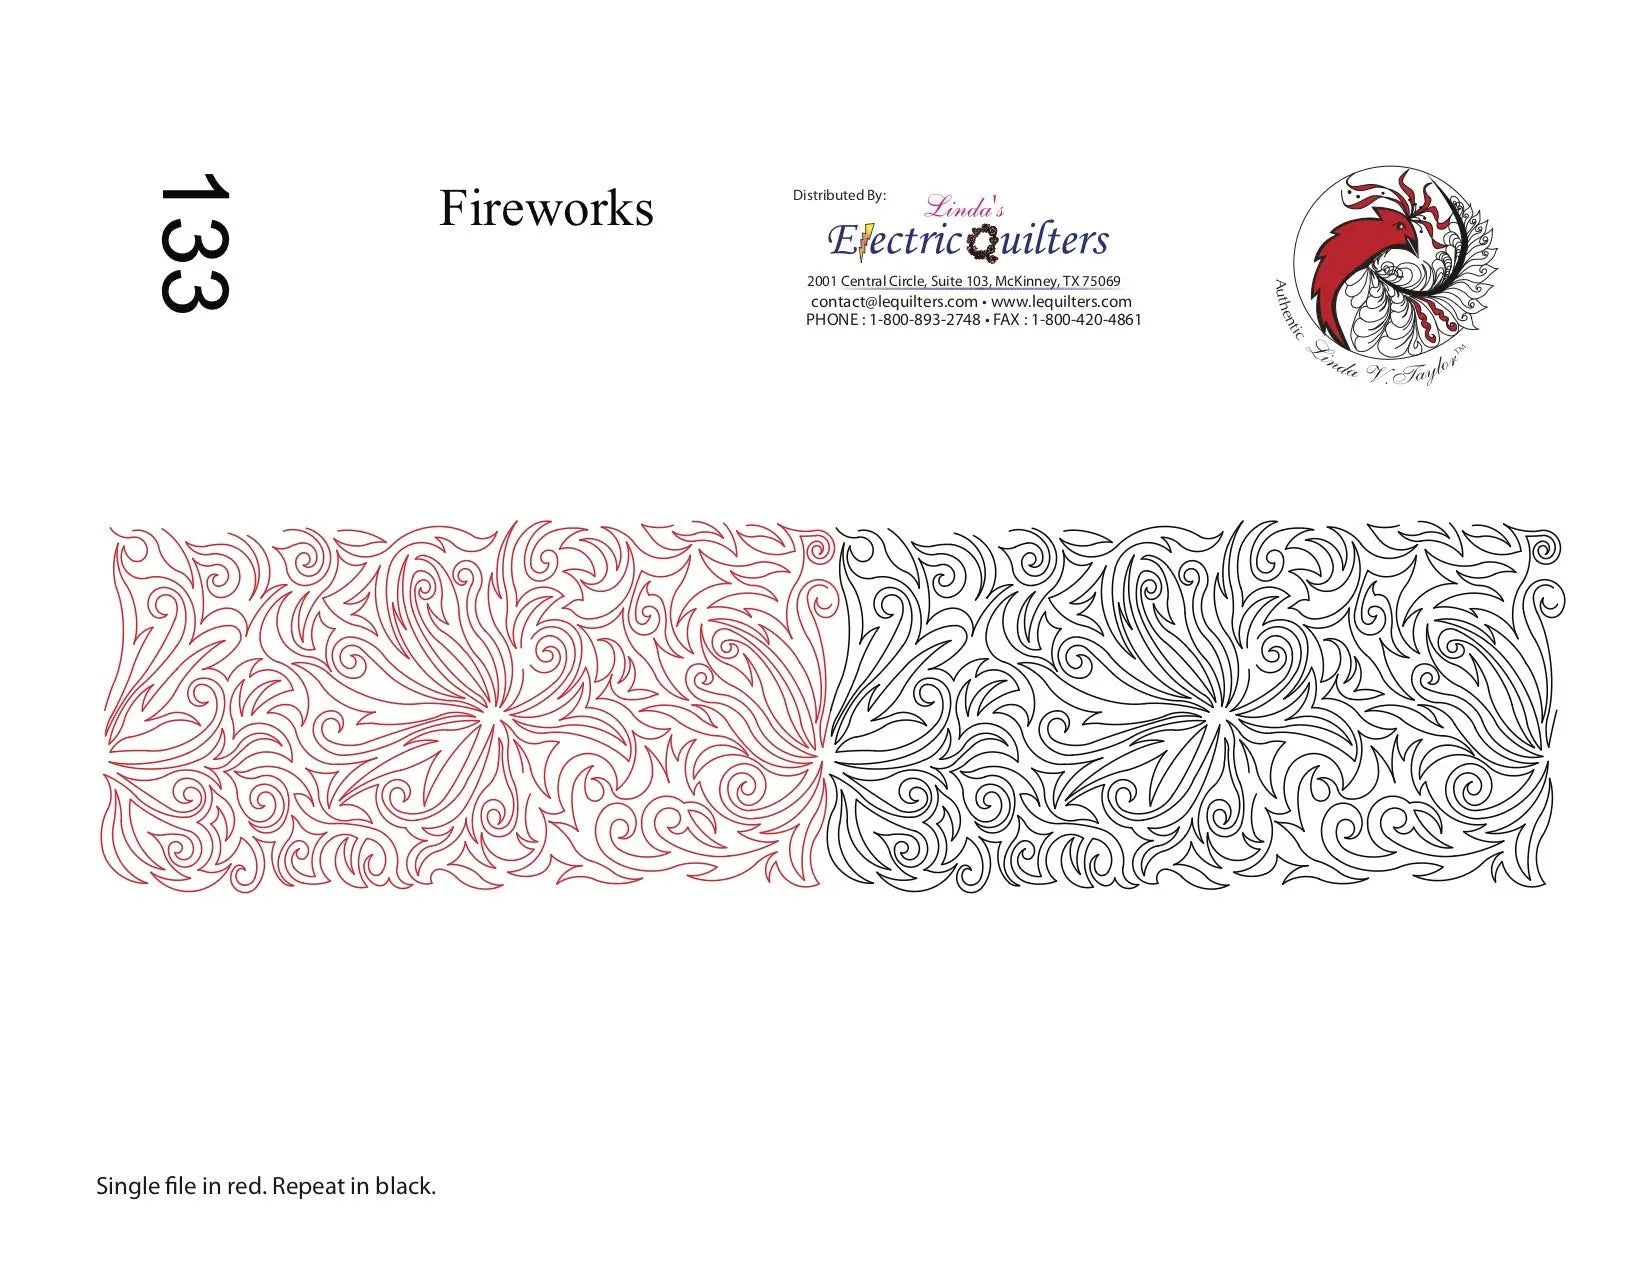 133 Fireworks Pantograph by Linda V. Taylor - Linda's Electric Quilters